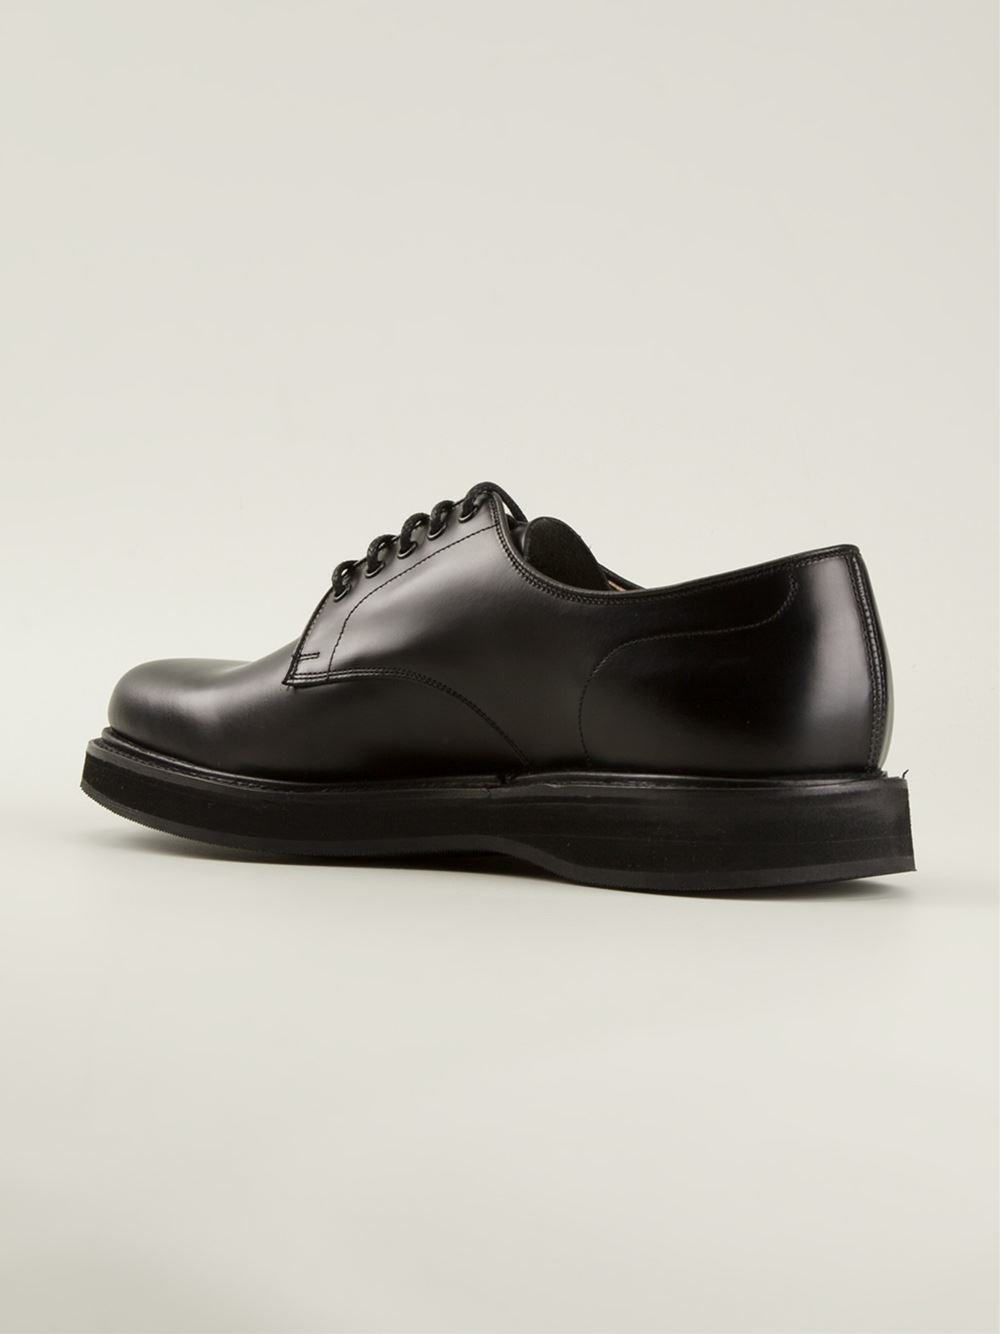 Lyst - Church's Rubber Sole Derby Shoes in Black for Men